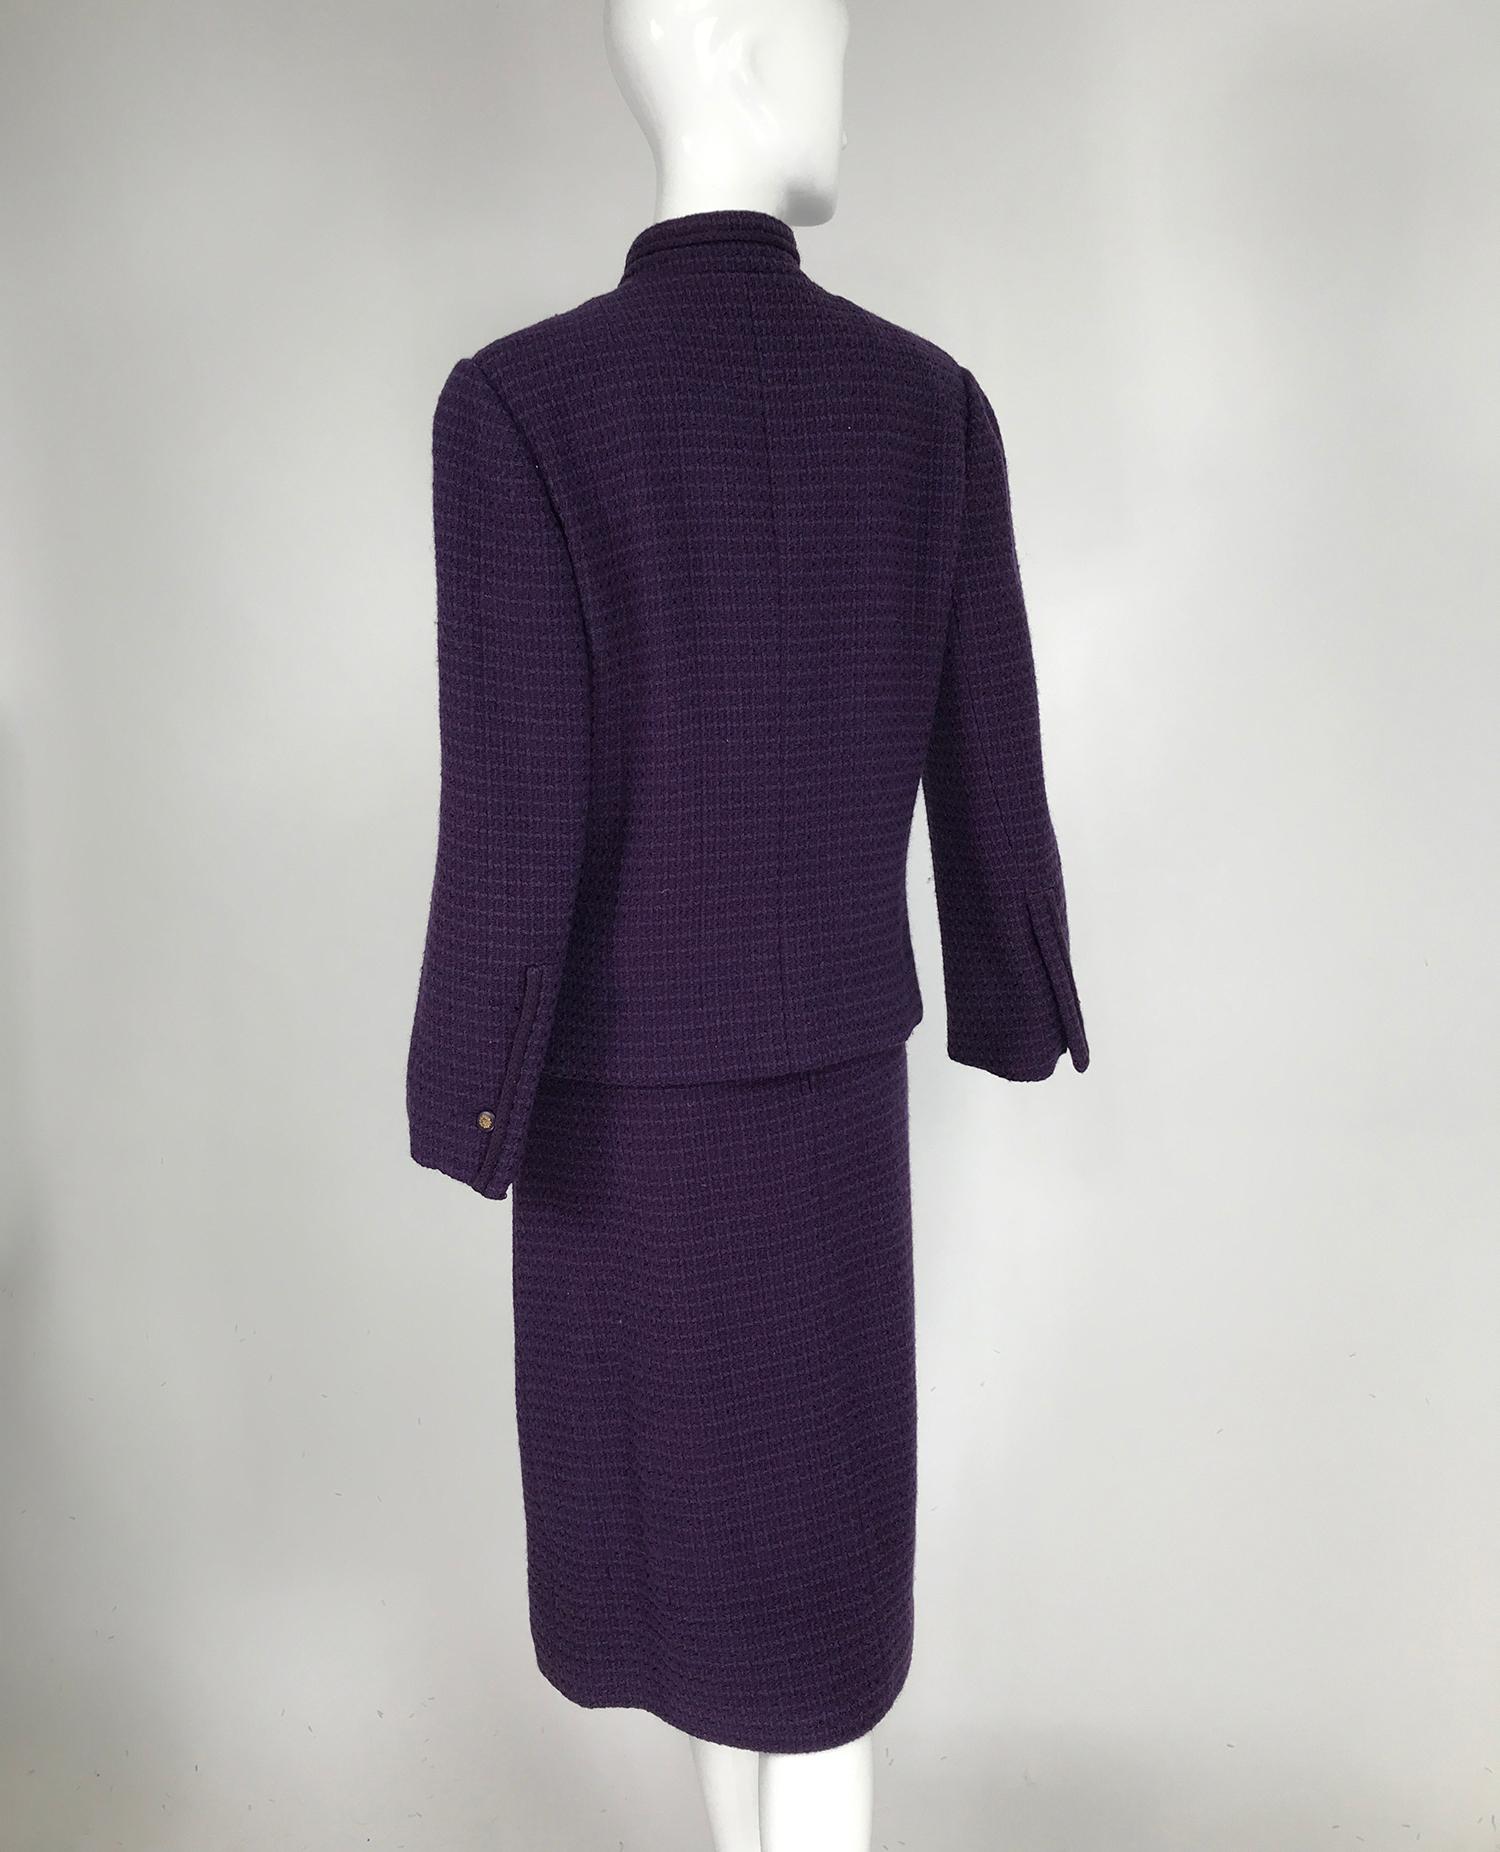 Vintage Chanel Creations Textured Purple Wool Skirt Suit 1970s In Good Condition For Sale In West Palm Beach, FL